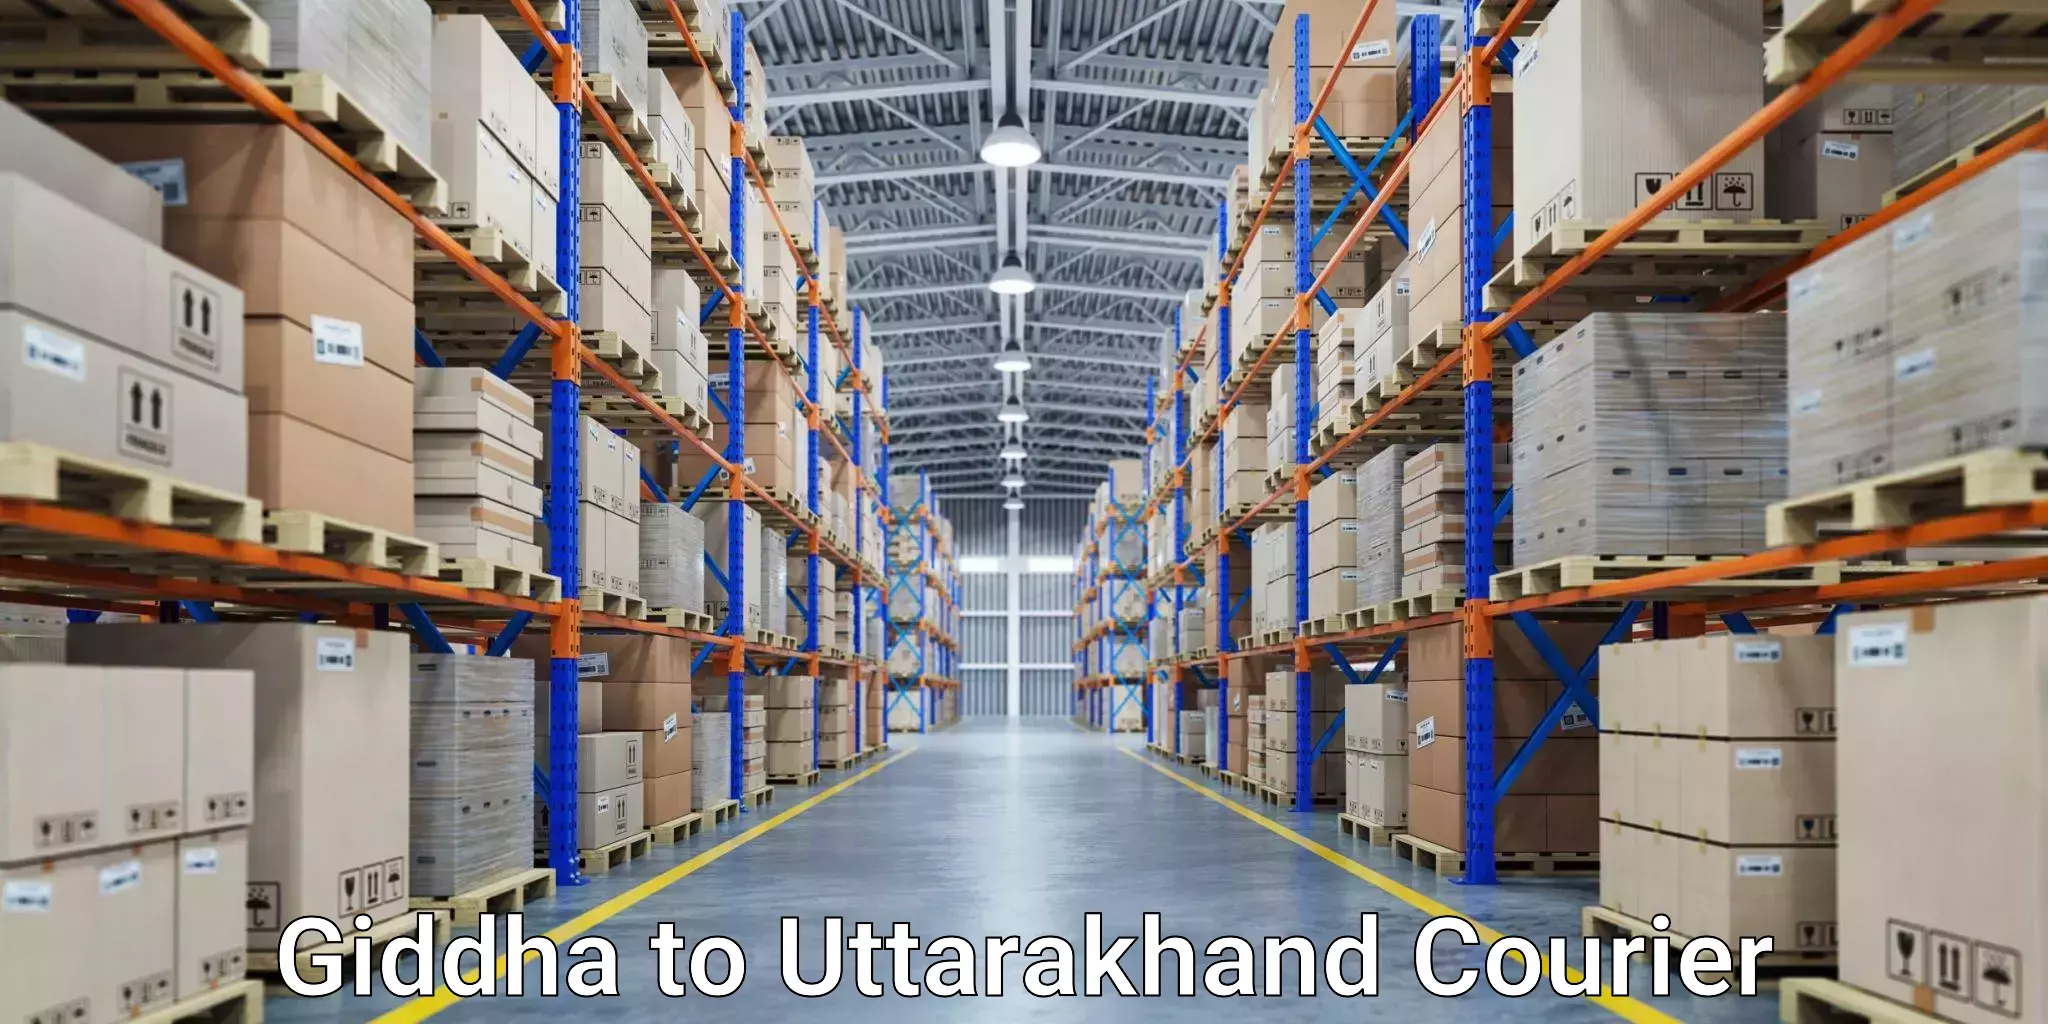 Express delivery network Giddha to Uttarakhand